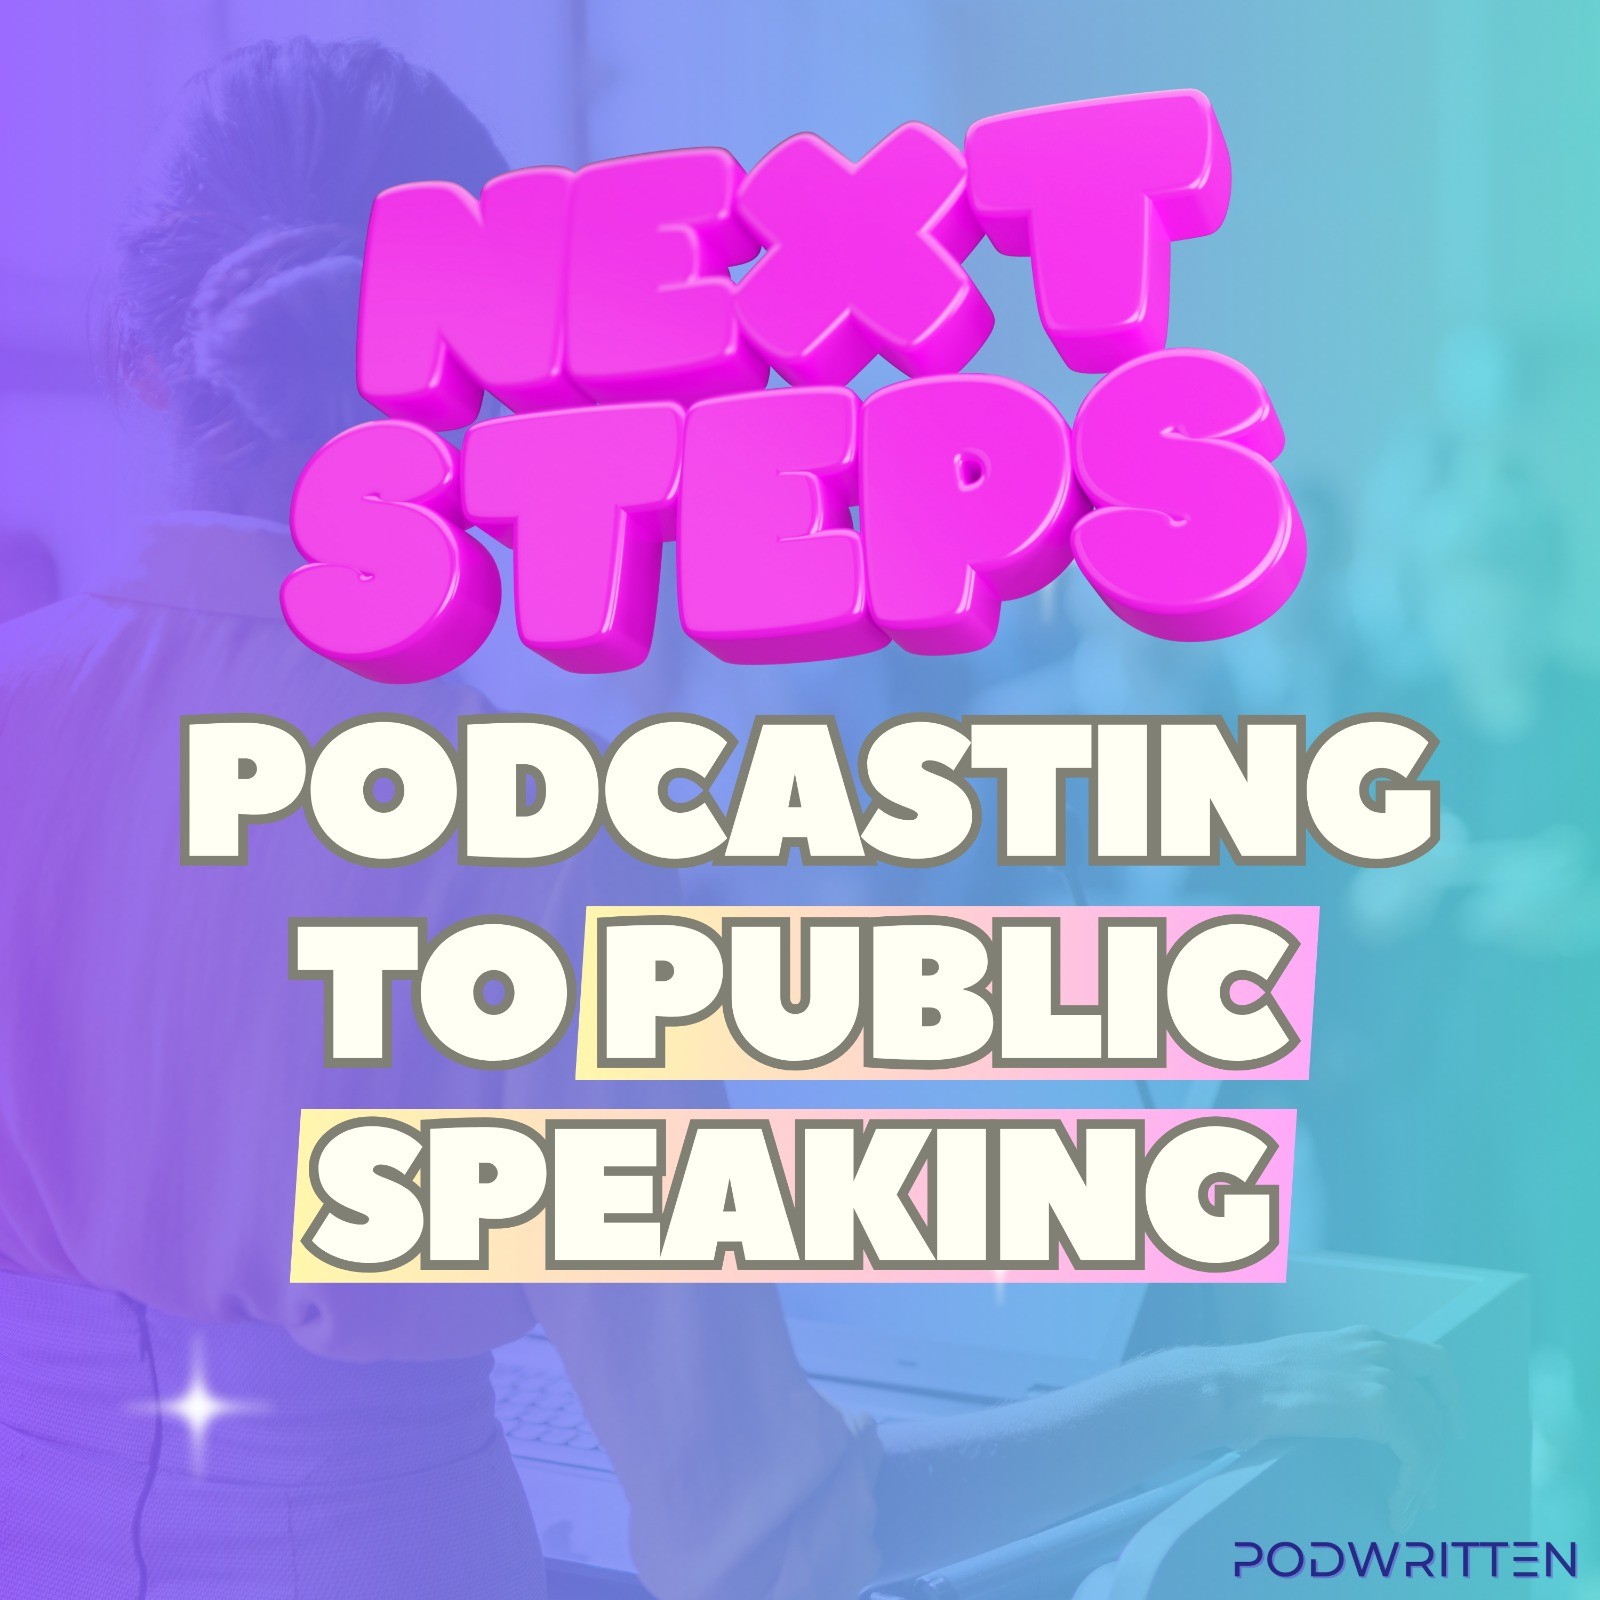 Stepping into public speaking through podcasting with Megan Lyons